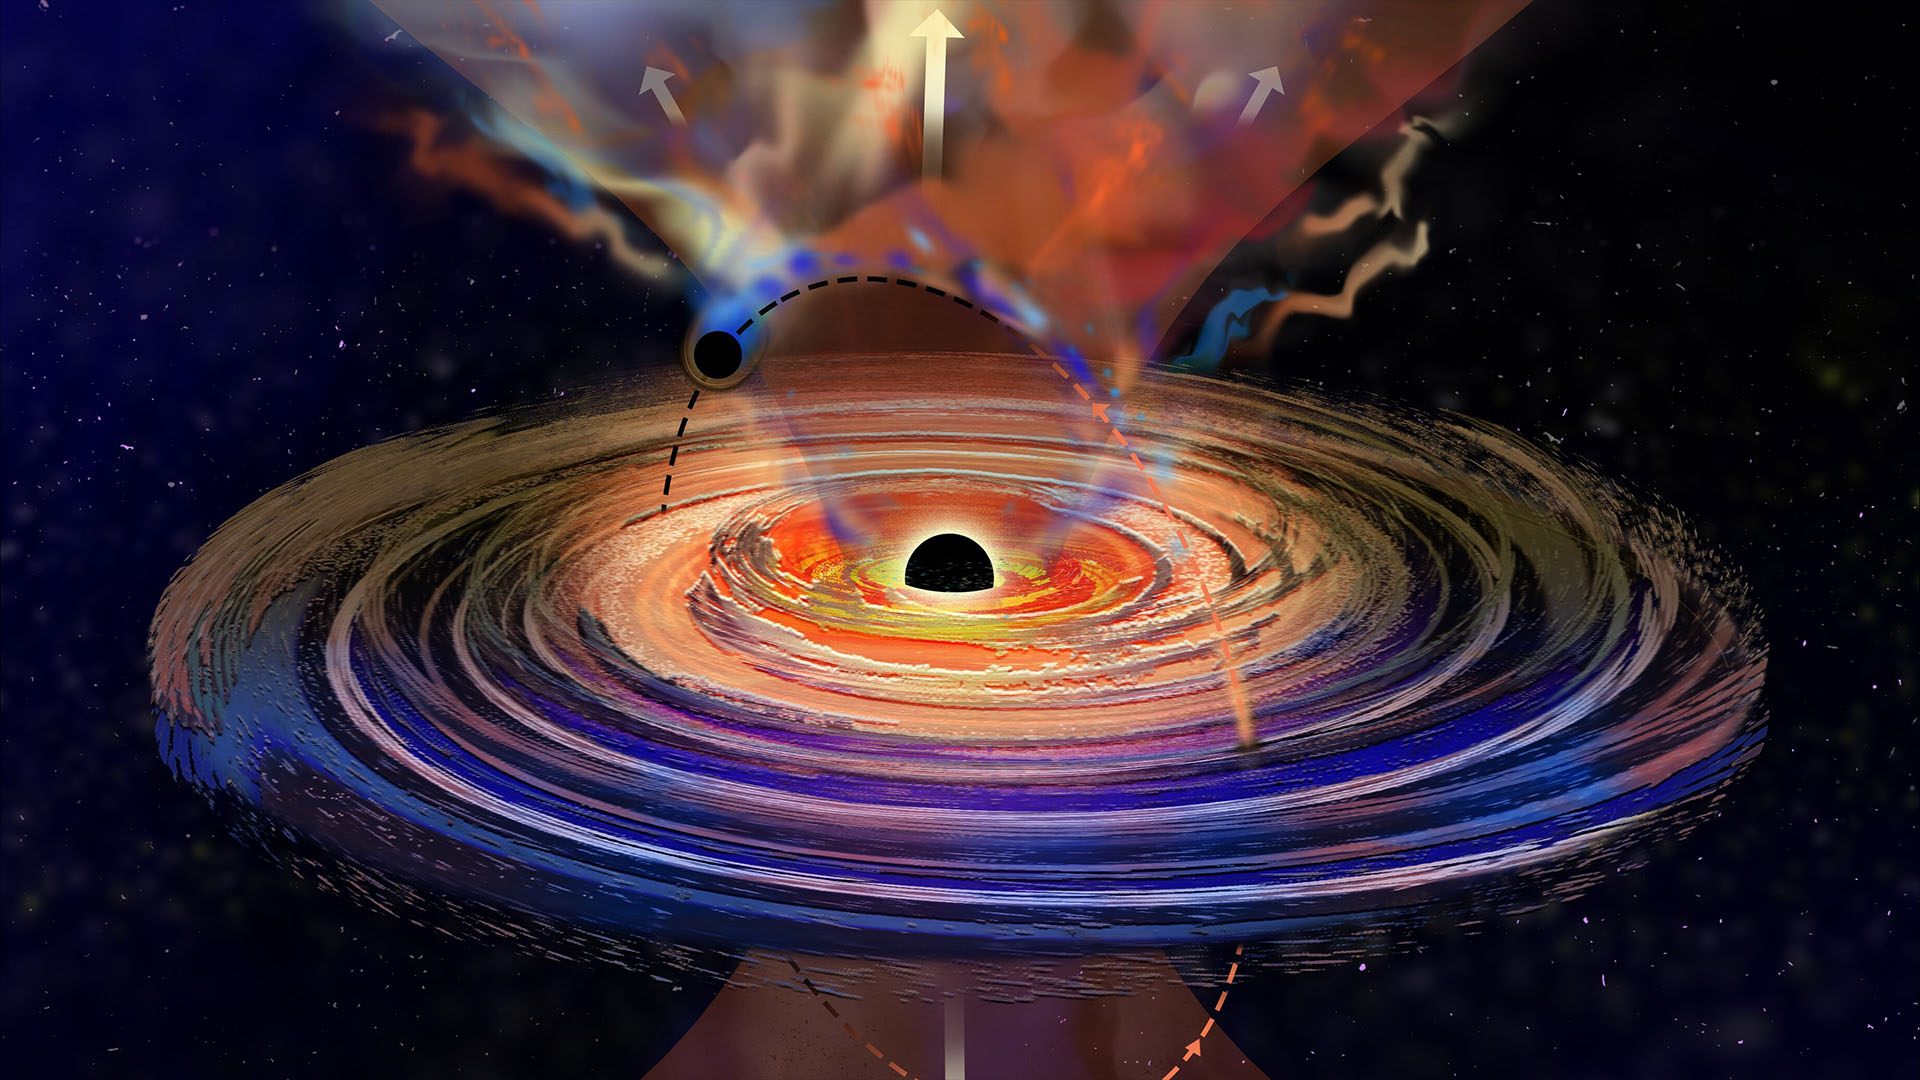 1st detection of 'hiccupping' black hole leads to surprising discovery of 2nd black hole orbiting around it